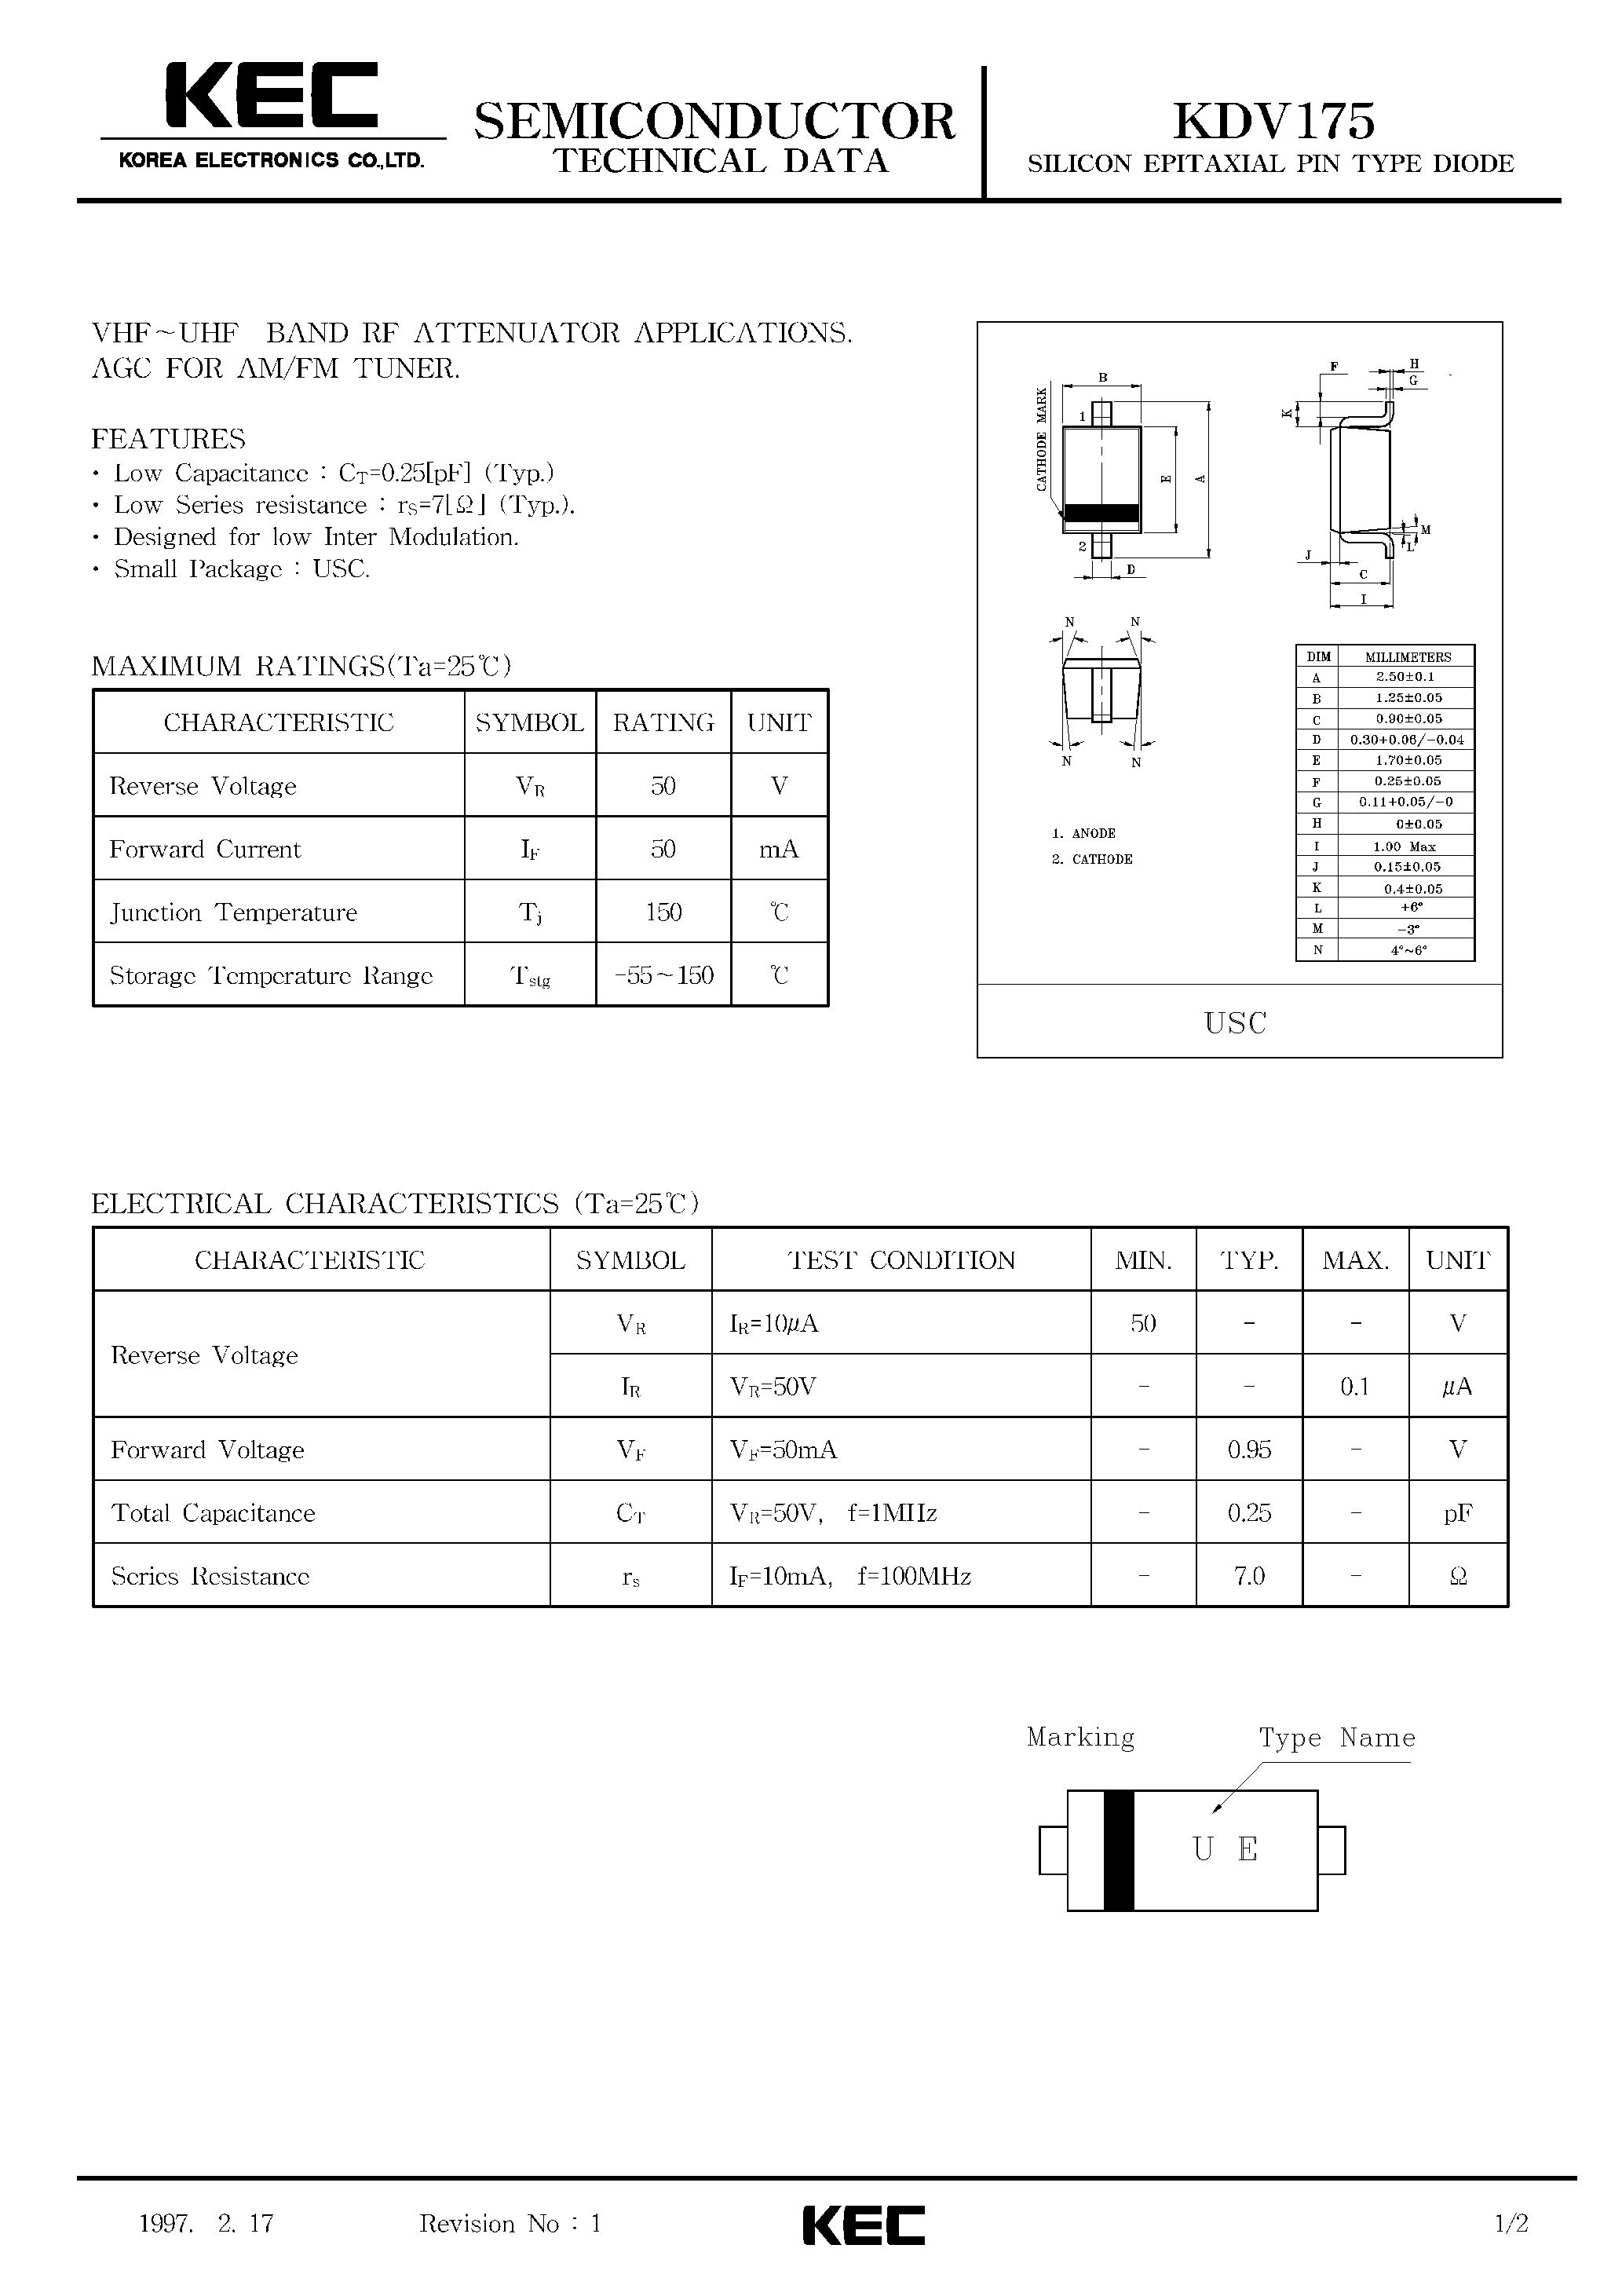 Datasheet KDV175 - SILICON EPITAXIAL PIN TYPE DIODE(VHF-UHF BAND RF ATTENUATOR / AGC FOR AM/FM TUNER) page 1